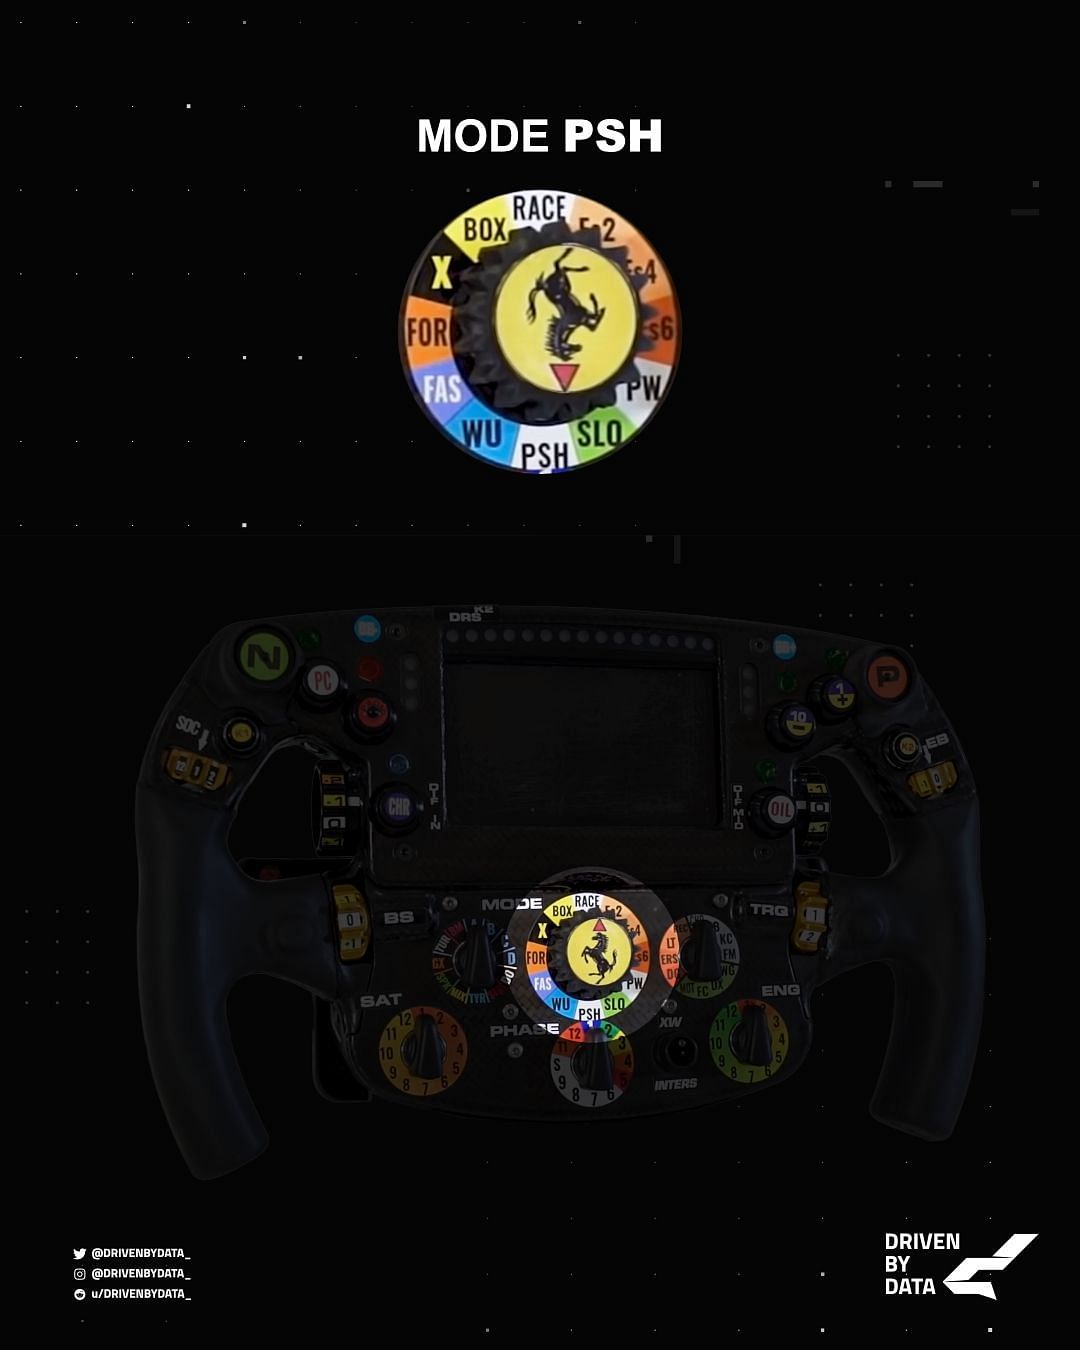 The MODE selector dial on the Ferrari steering wheel (Image credits: Twitter/@DrivenByData_)